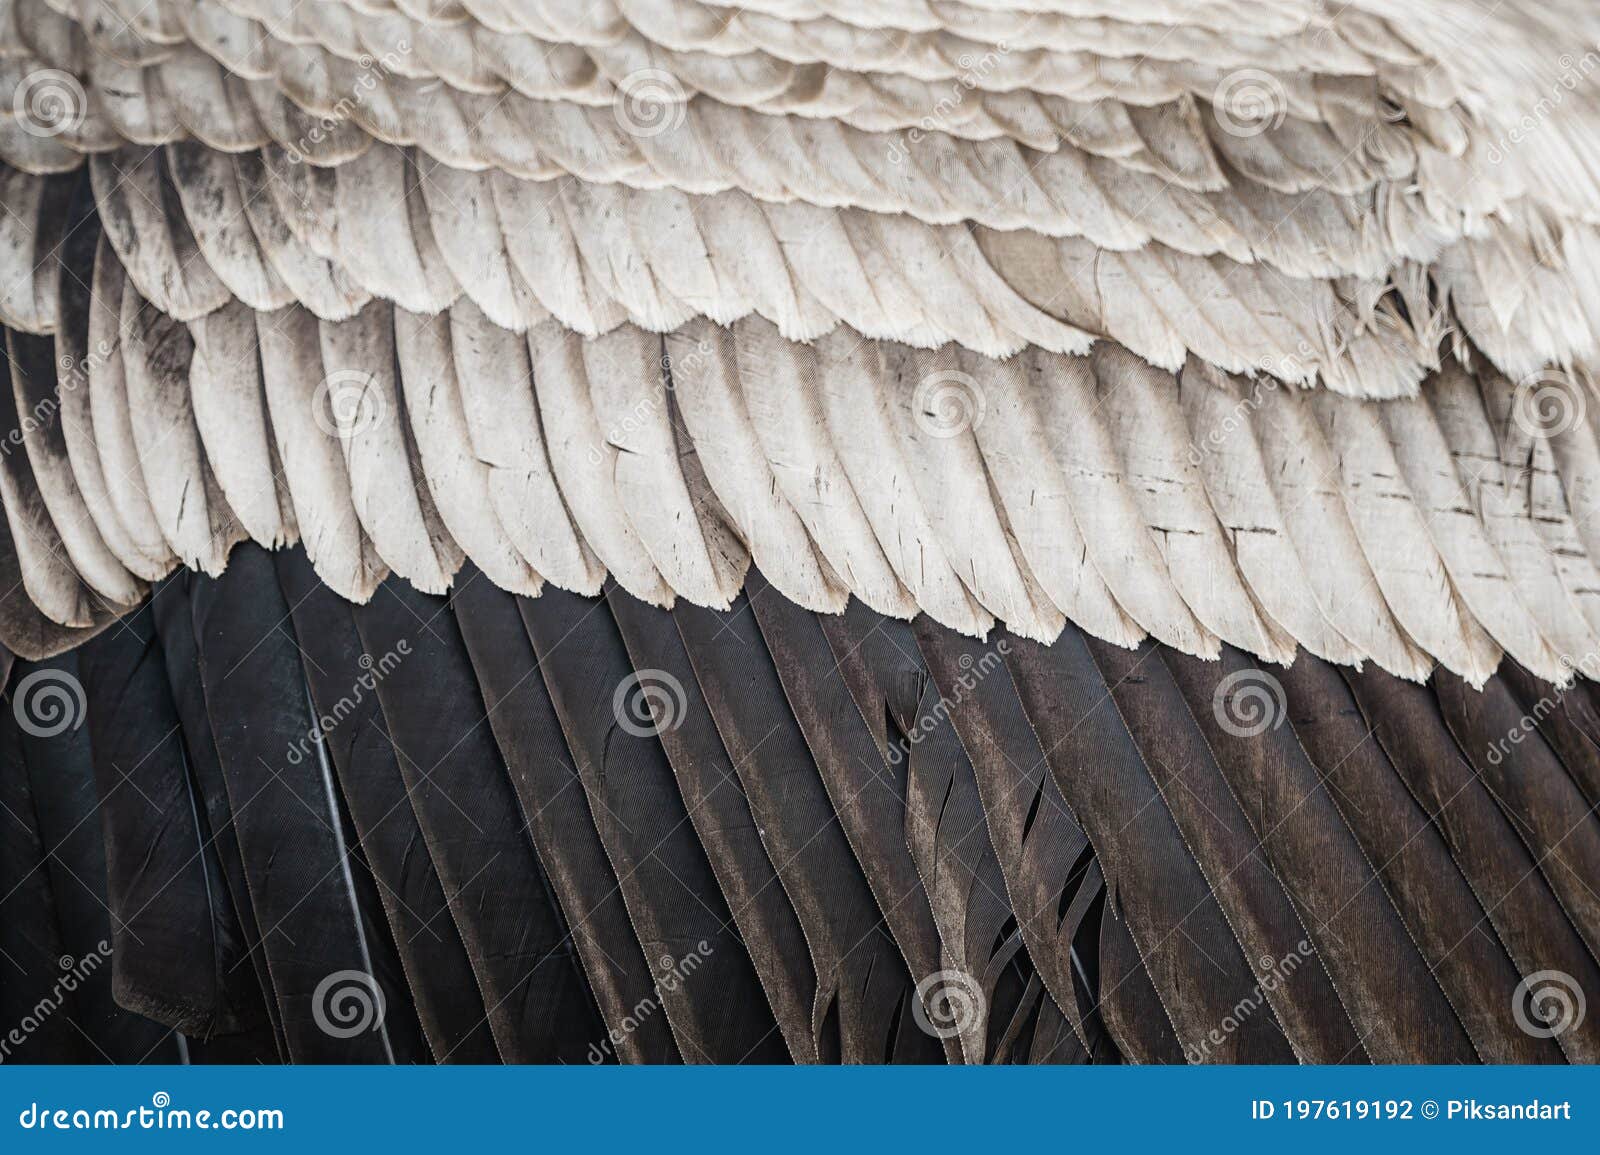 feathers of an andean condor - natural feather texture background